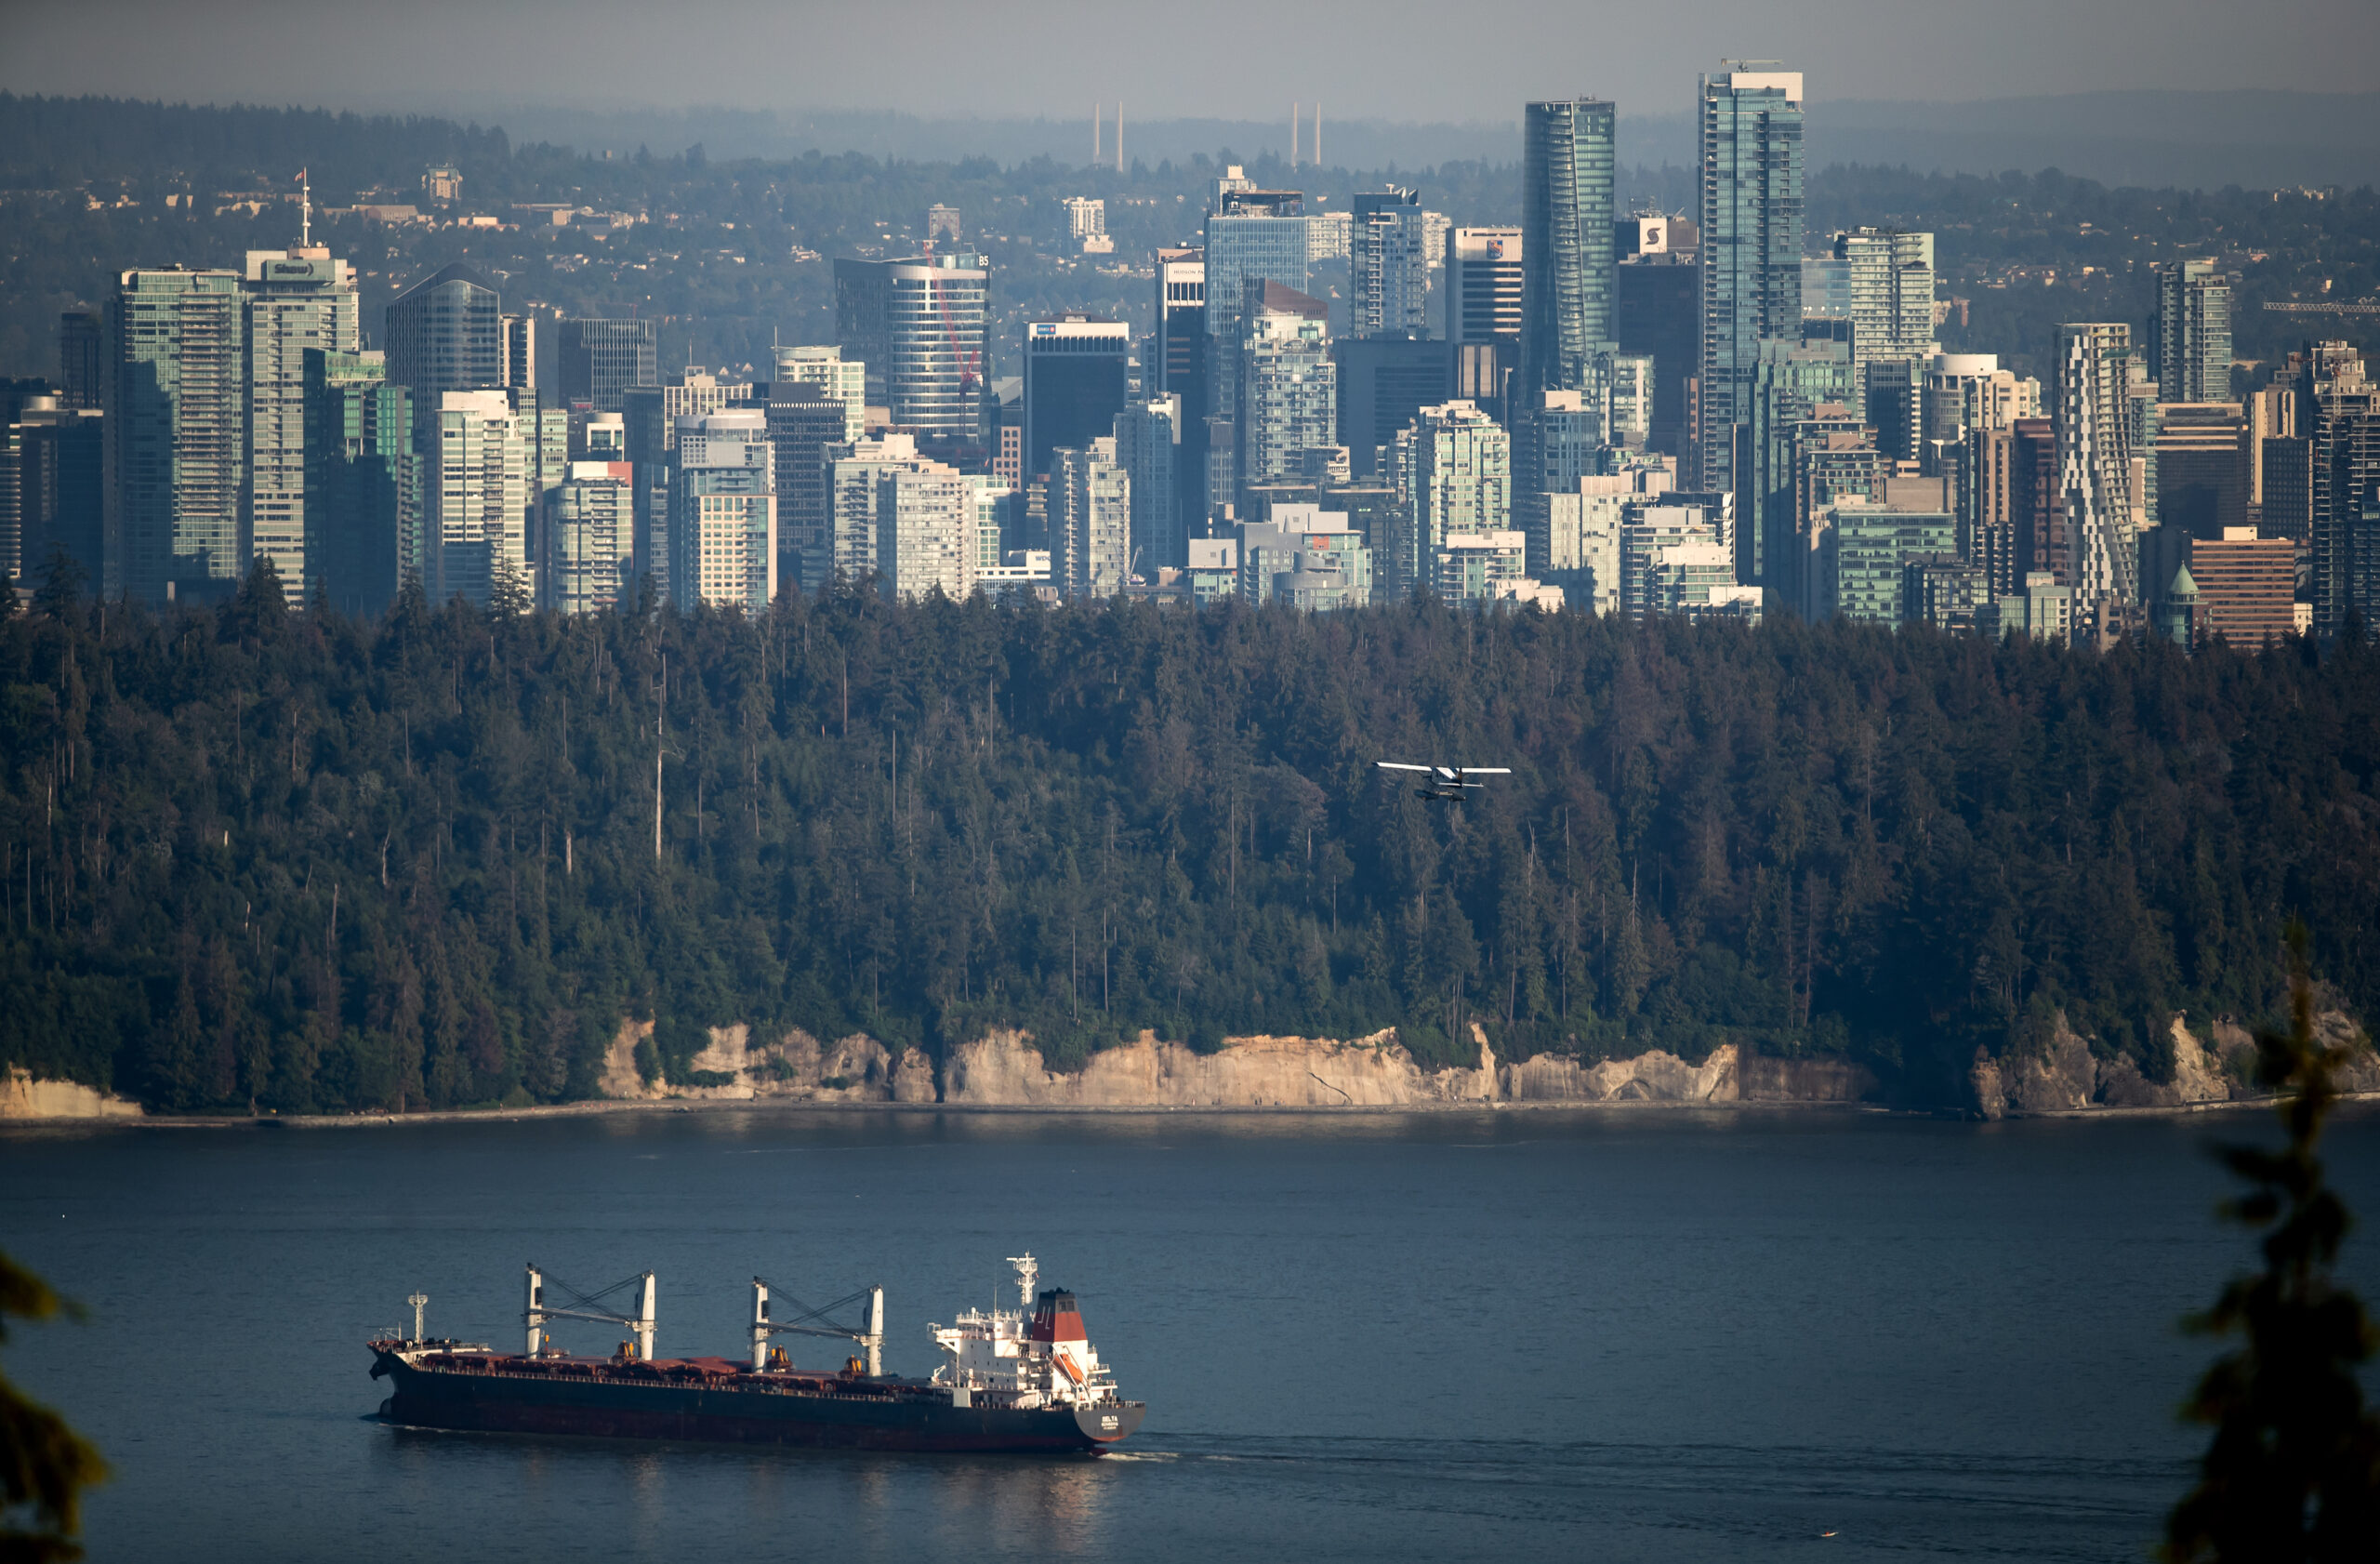 An ocean liner is seen in the foreground in a bay with Vancouver's skyline in the background and some trees in the middle of the photo. A small plane can also be seen.